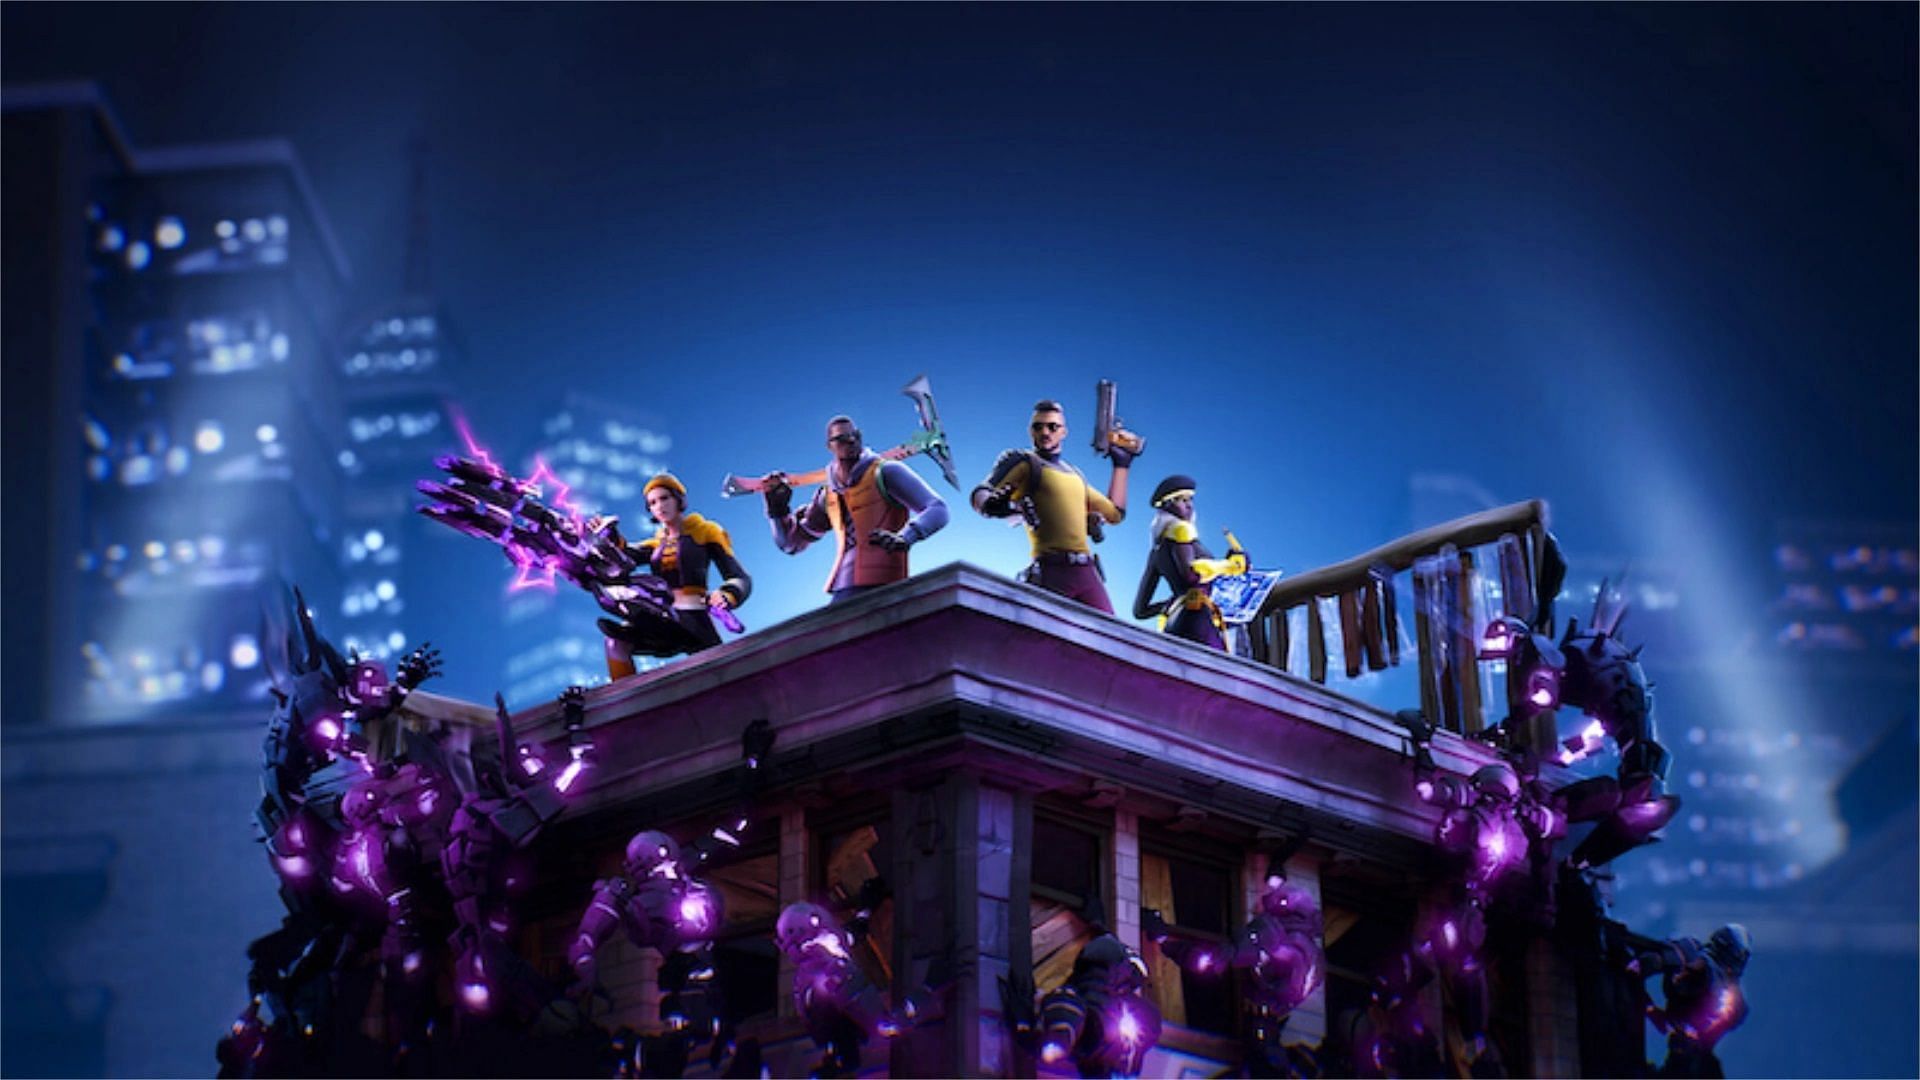 The exclusive backbling is obtained from the Horde Rush mode (Image via Epic Games)